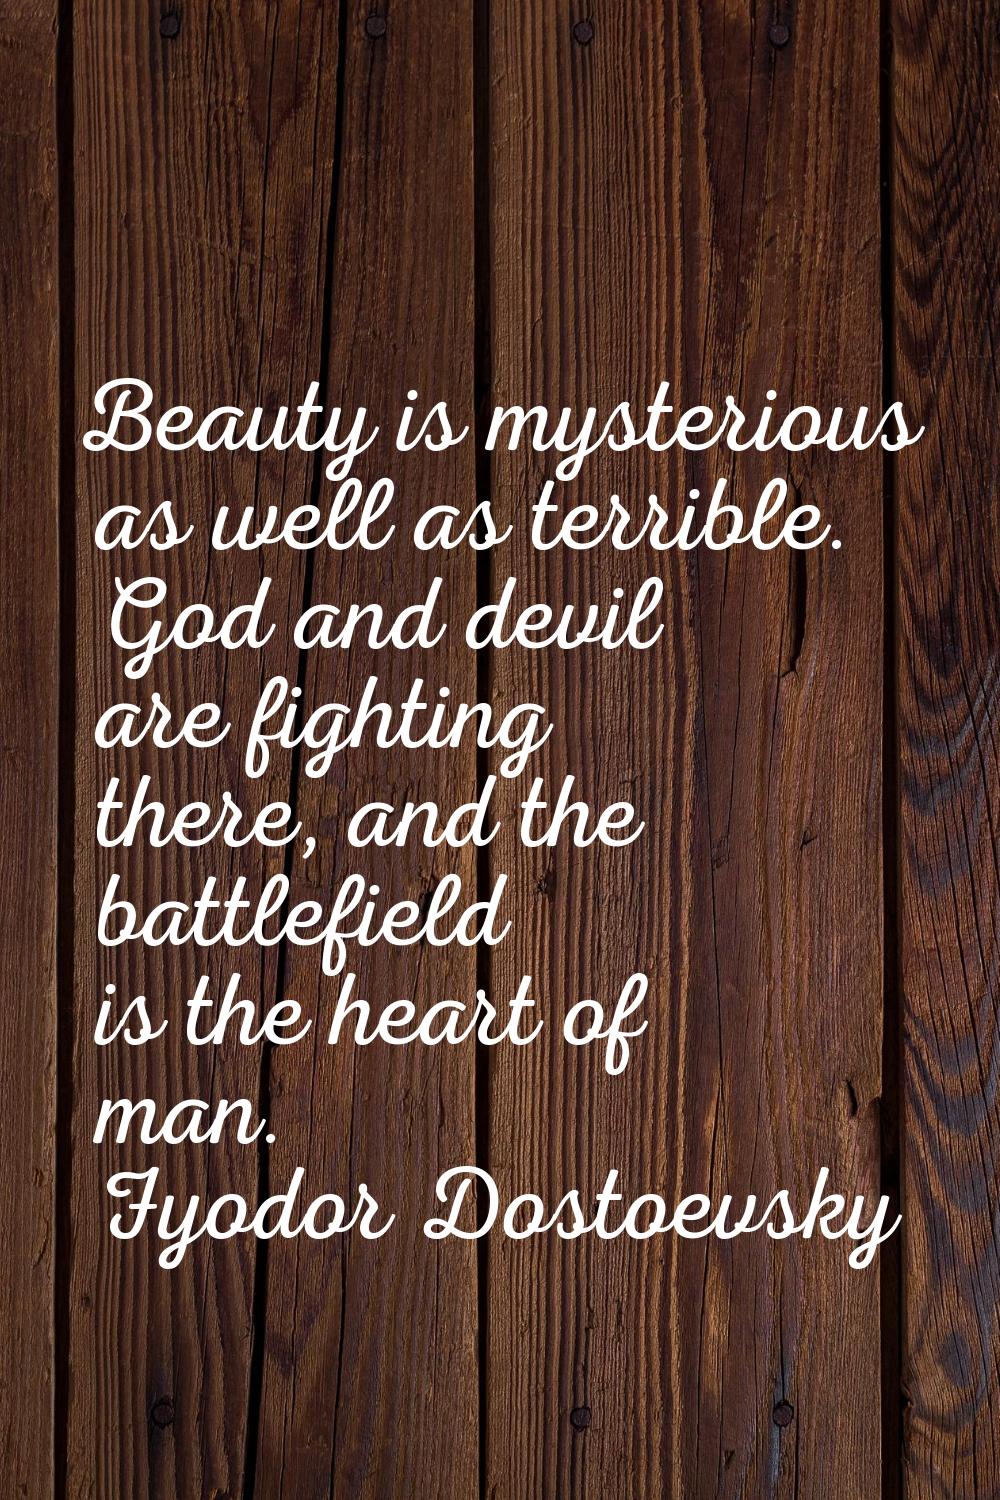 Beauty is mysterious as well as terrible. God and devil are fighting there, and the battlefield is 